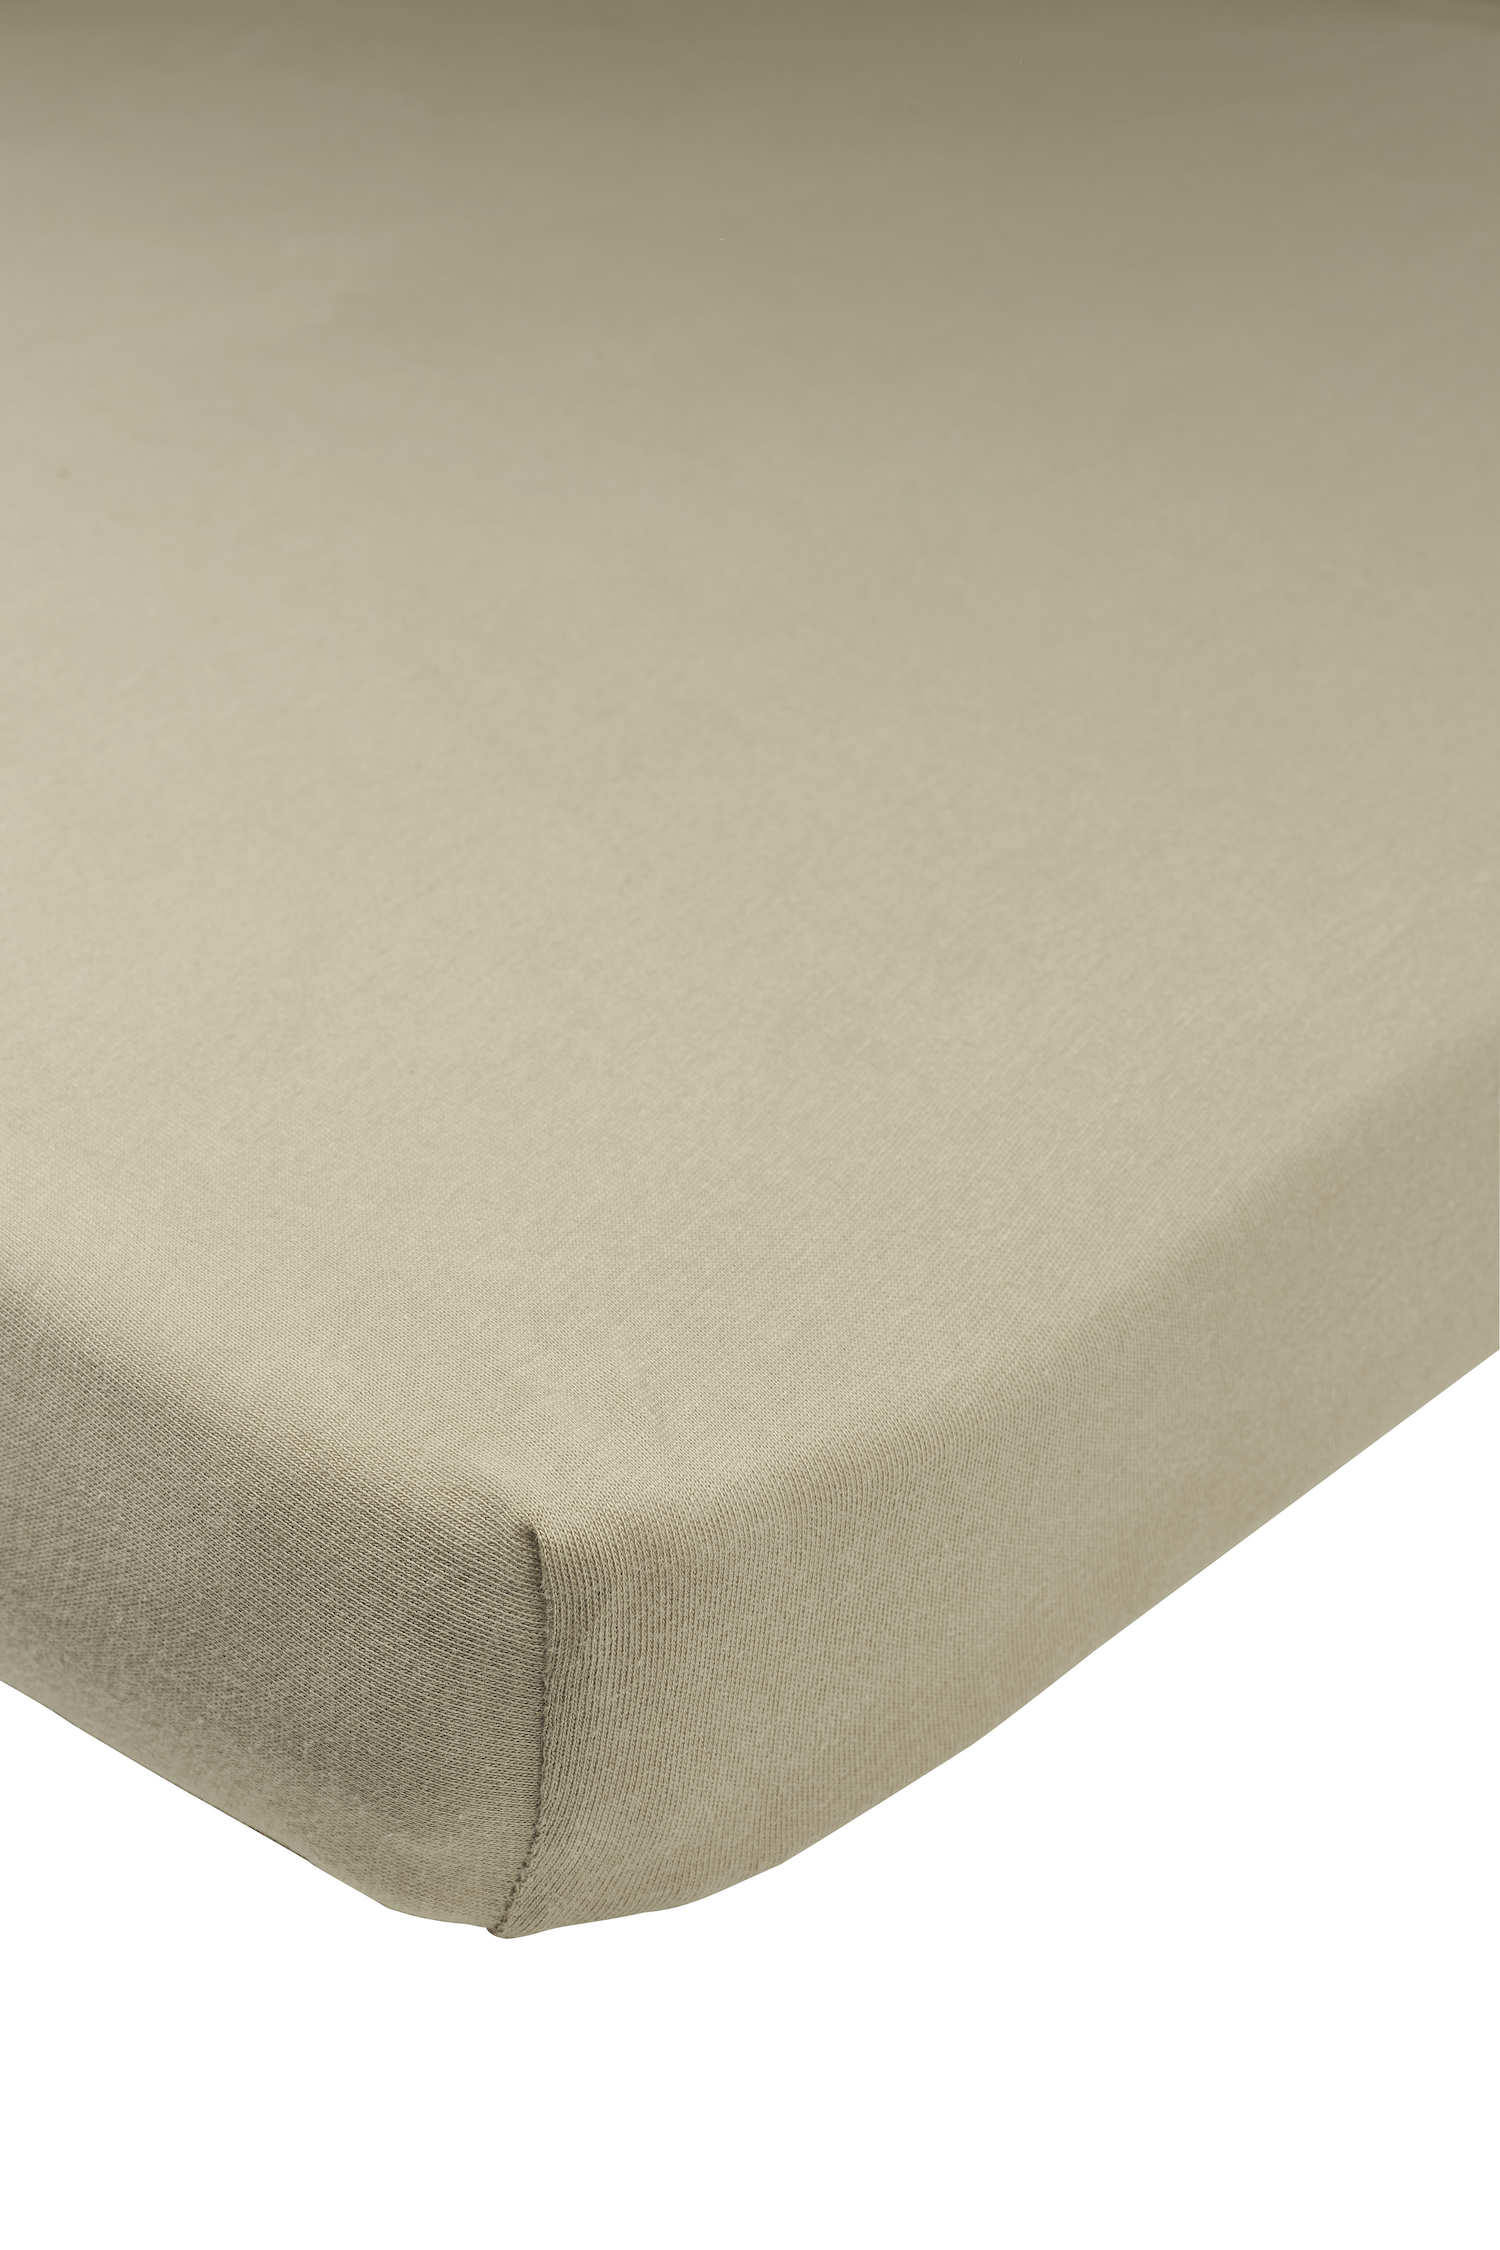 Jersey Fitted Sheet - Taupe - 75x95cm